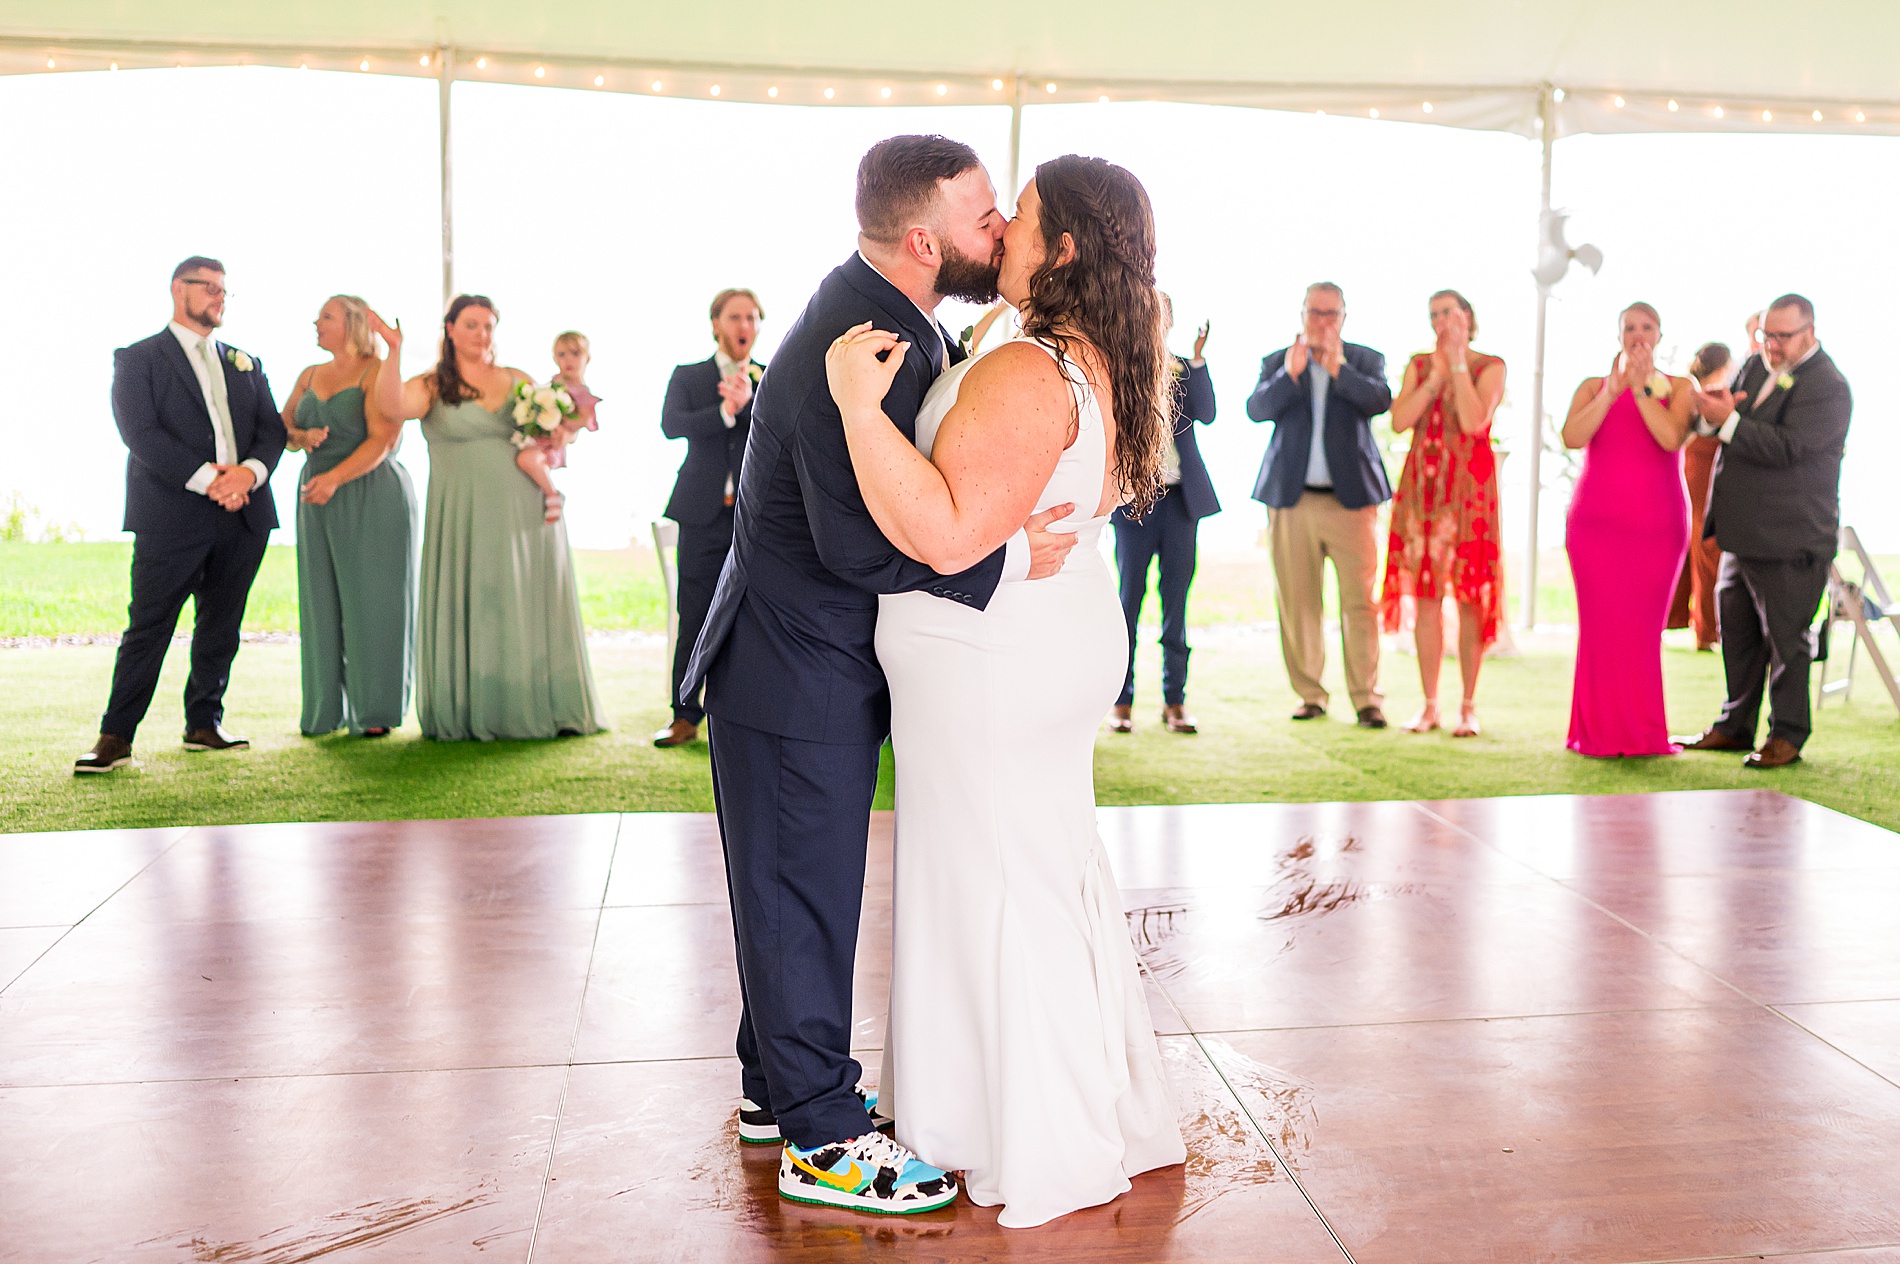 newlyweds share first dance together at reception